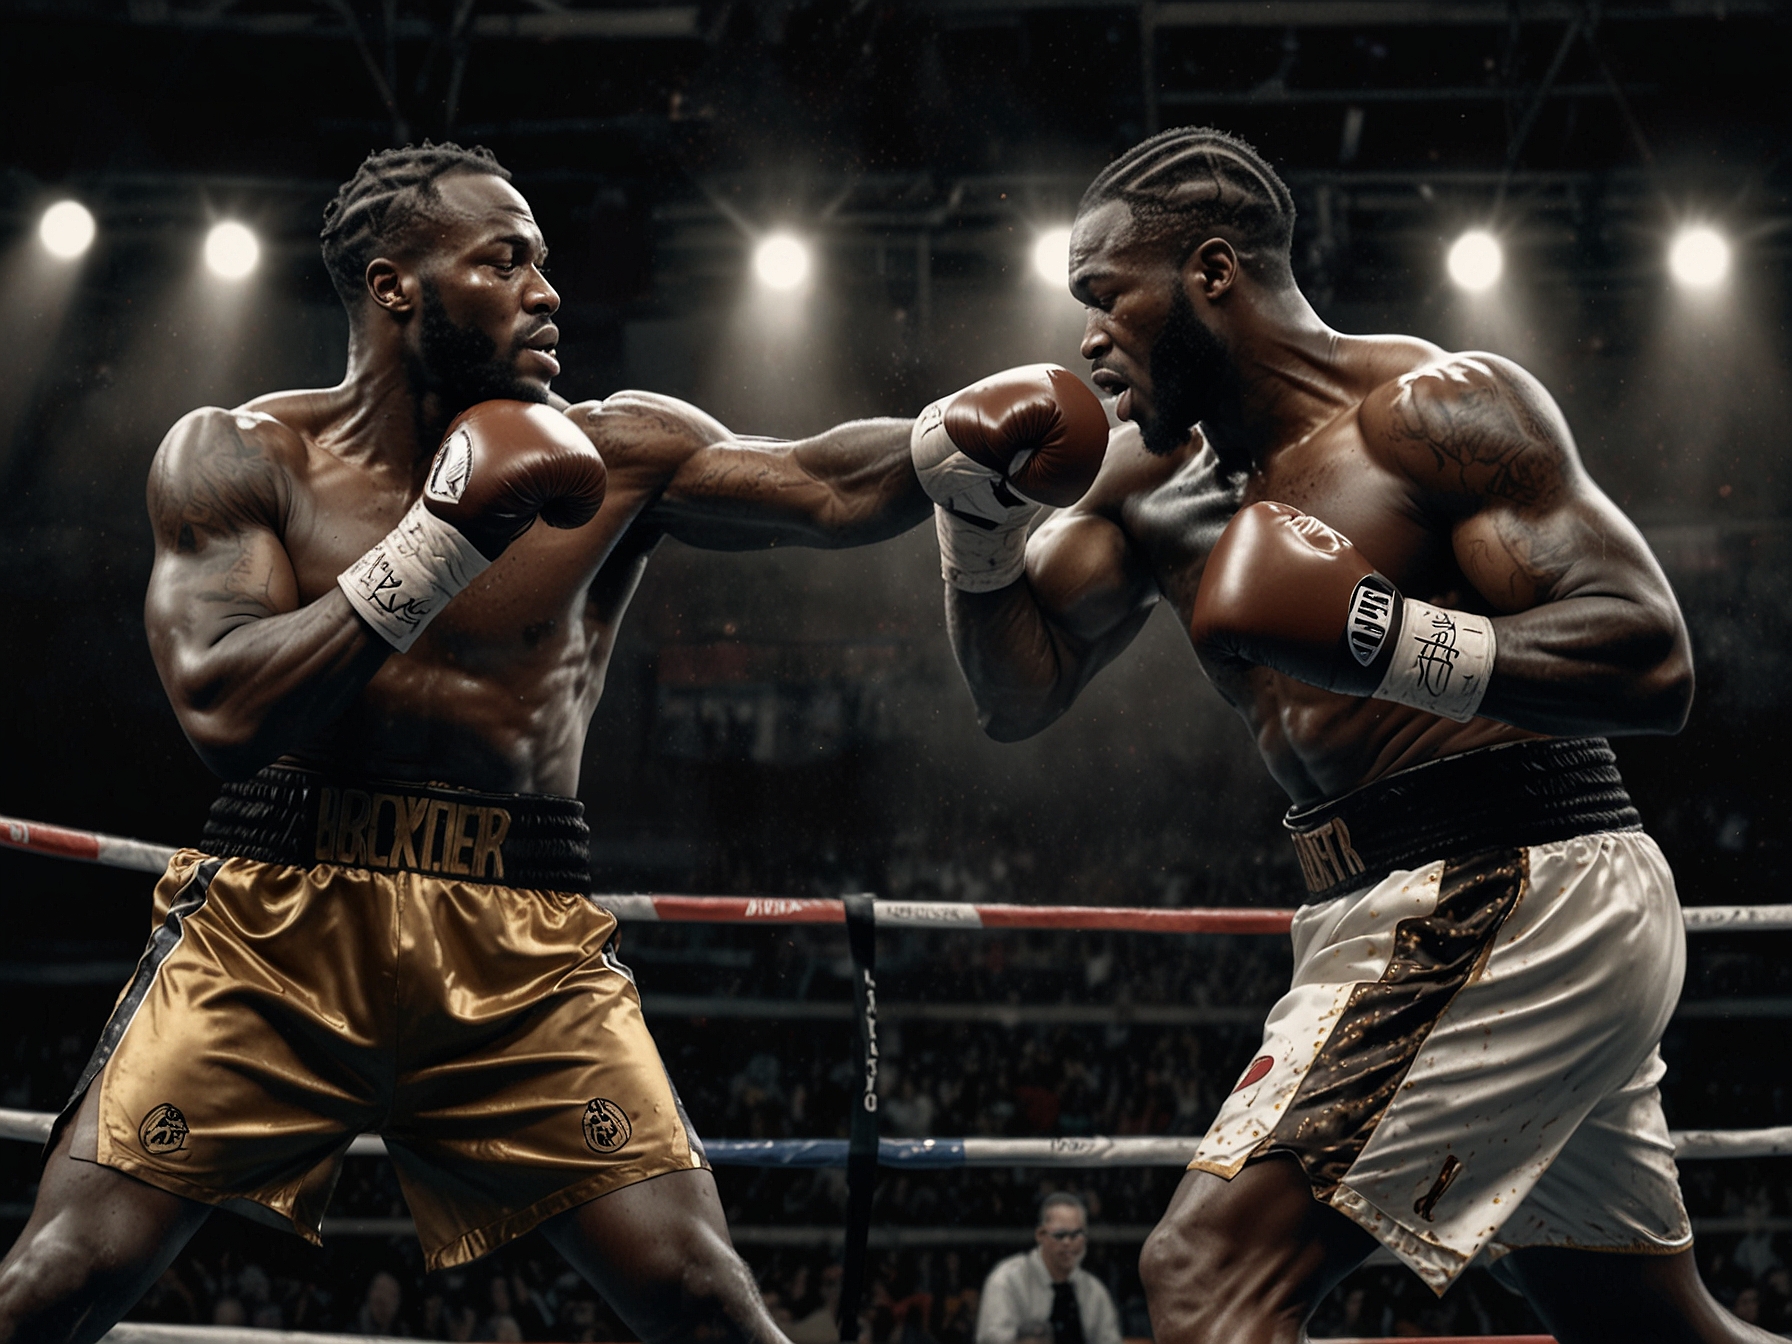 An intense moment in the boxing ring where Deontay Wilder, 'The Bronze Bomber,' struggles during his latest fight, as his opponent capitalizes on his predictable fighting style.